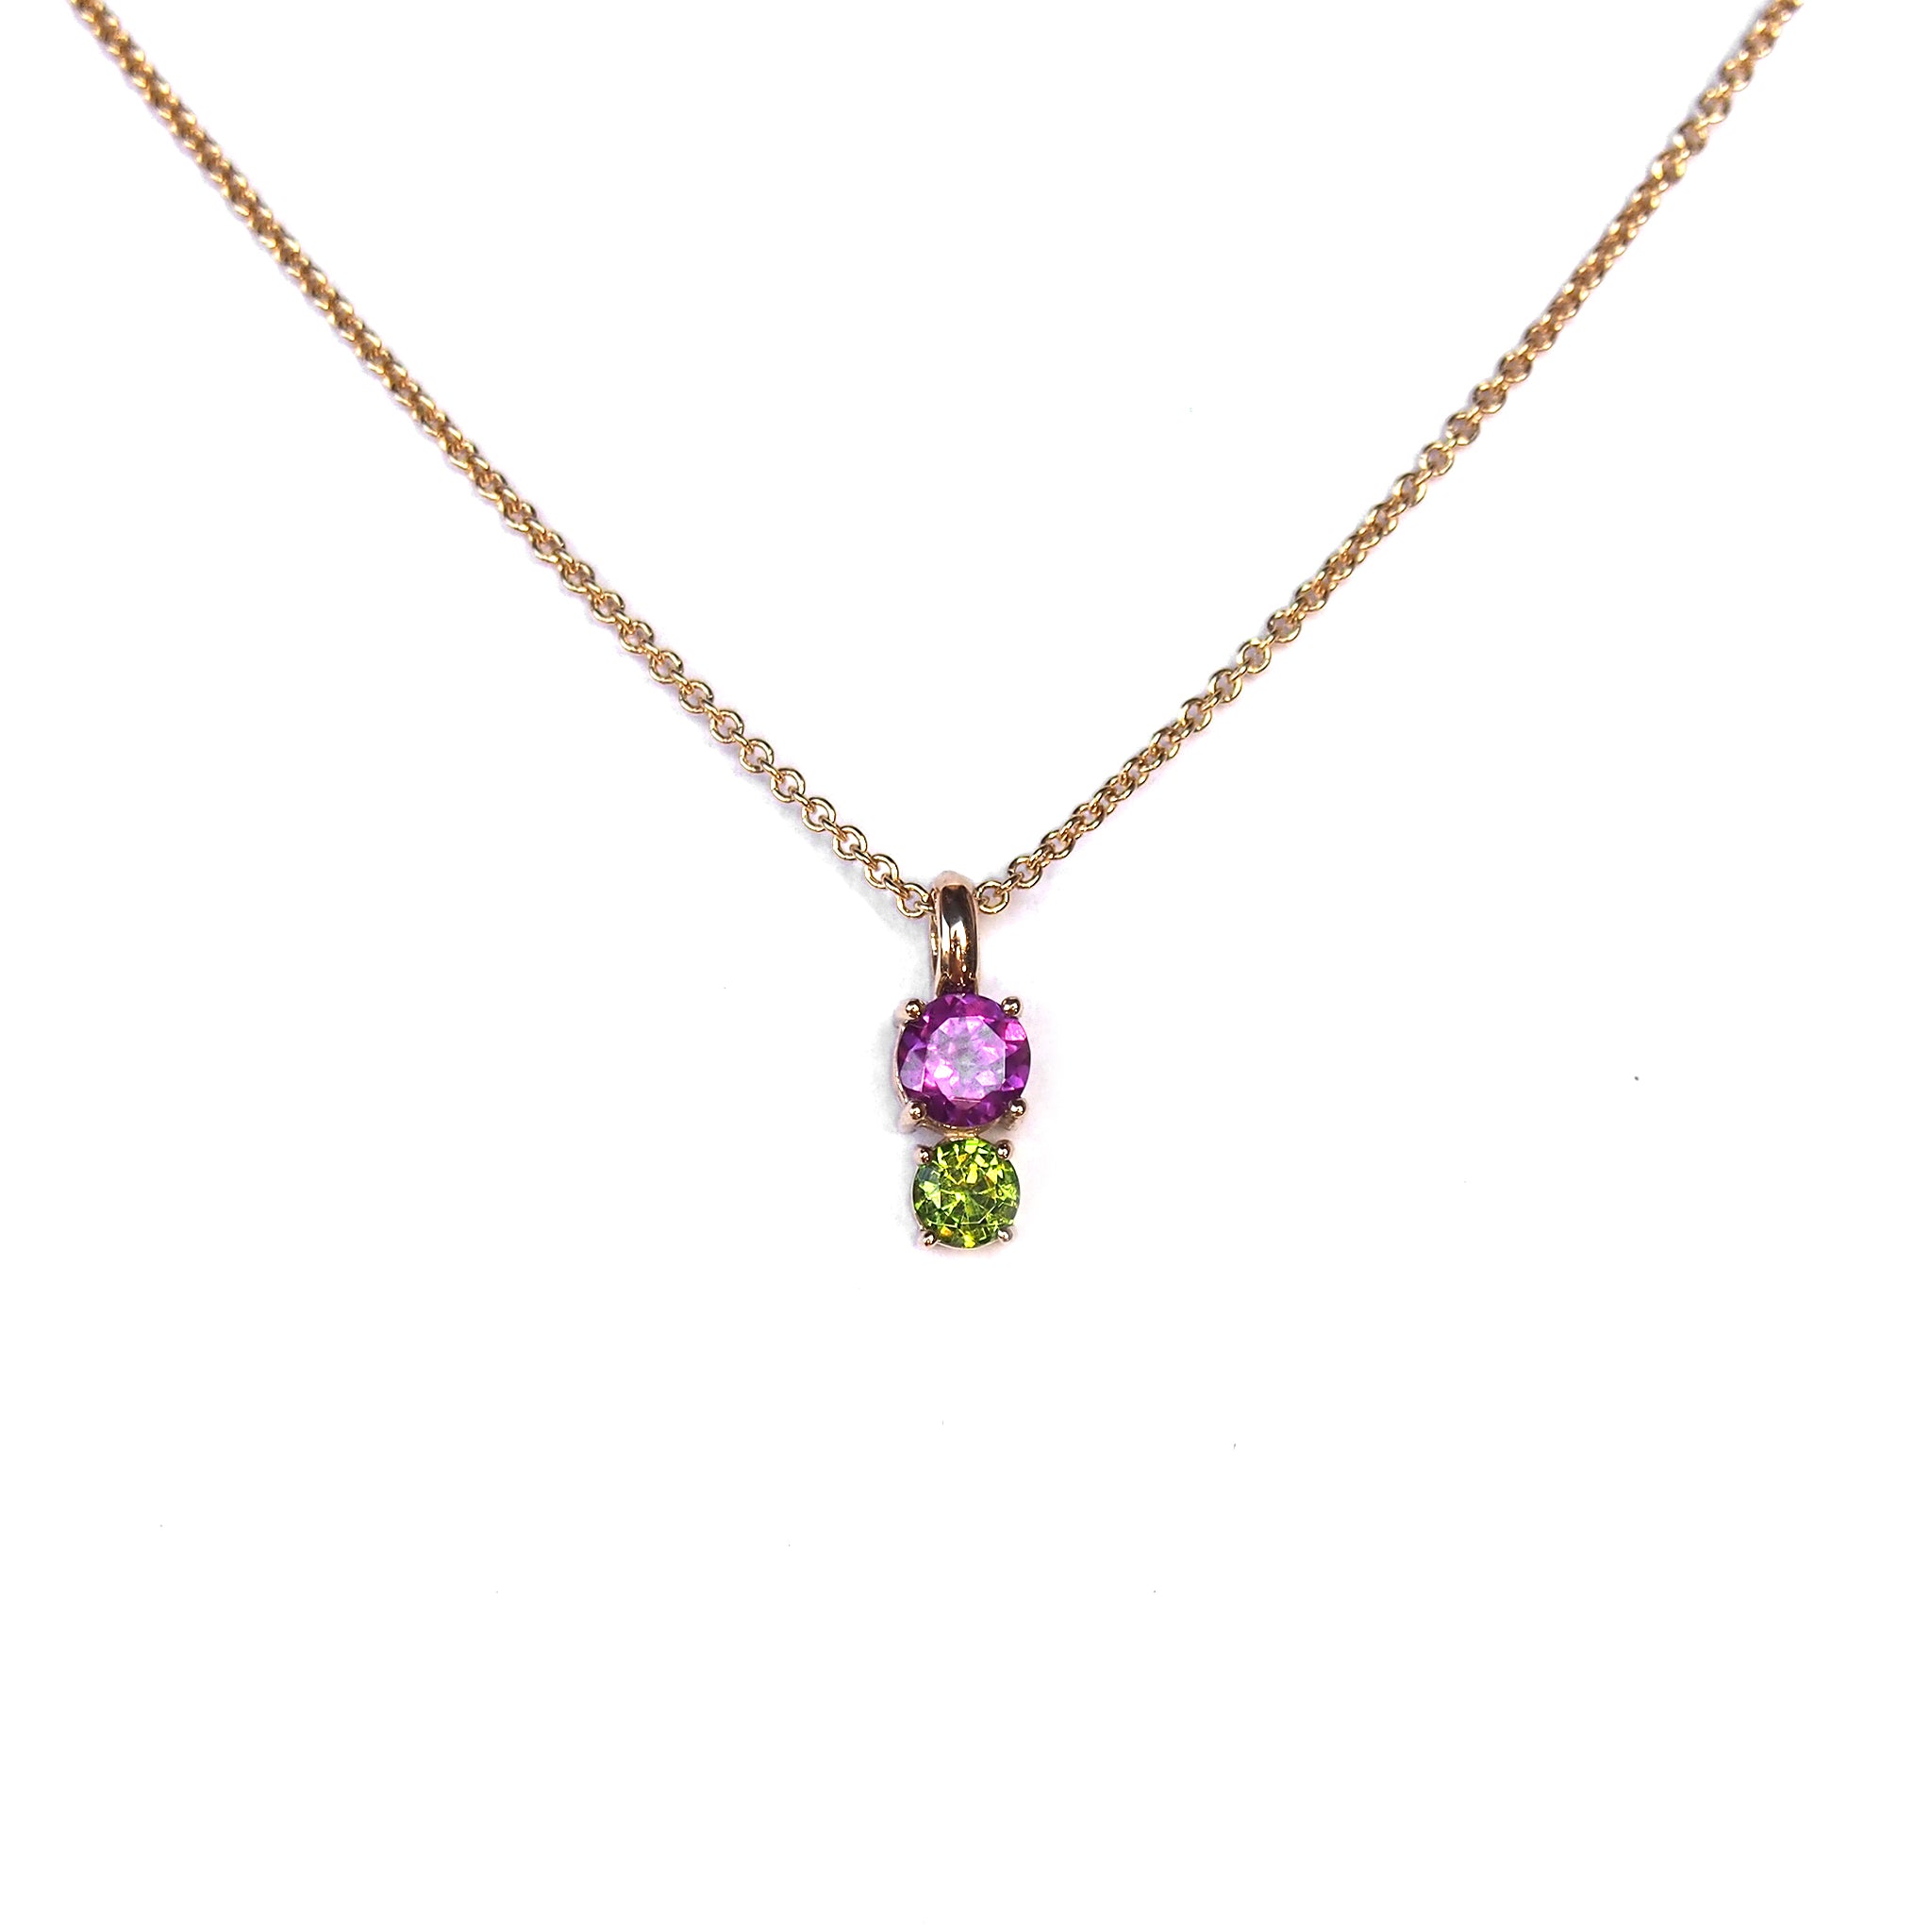 Rhododendron pendant with rhodolite garnet and peridot stones on a 20-inch rolo chain in solid 14k yellow gold